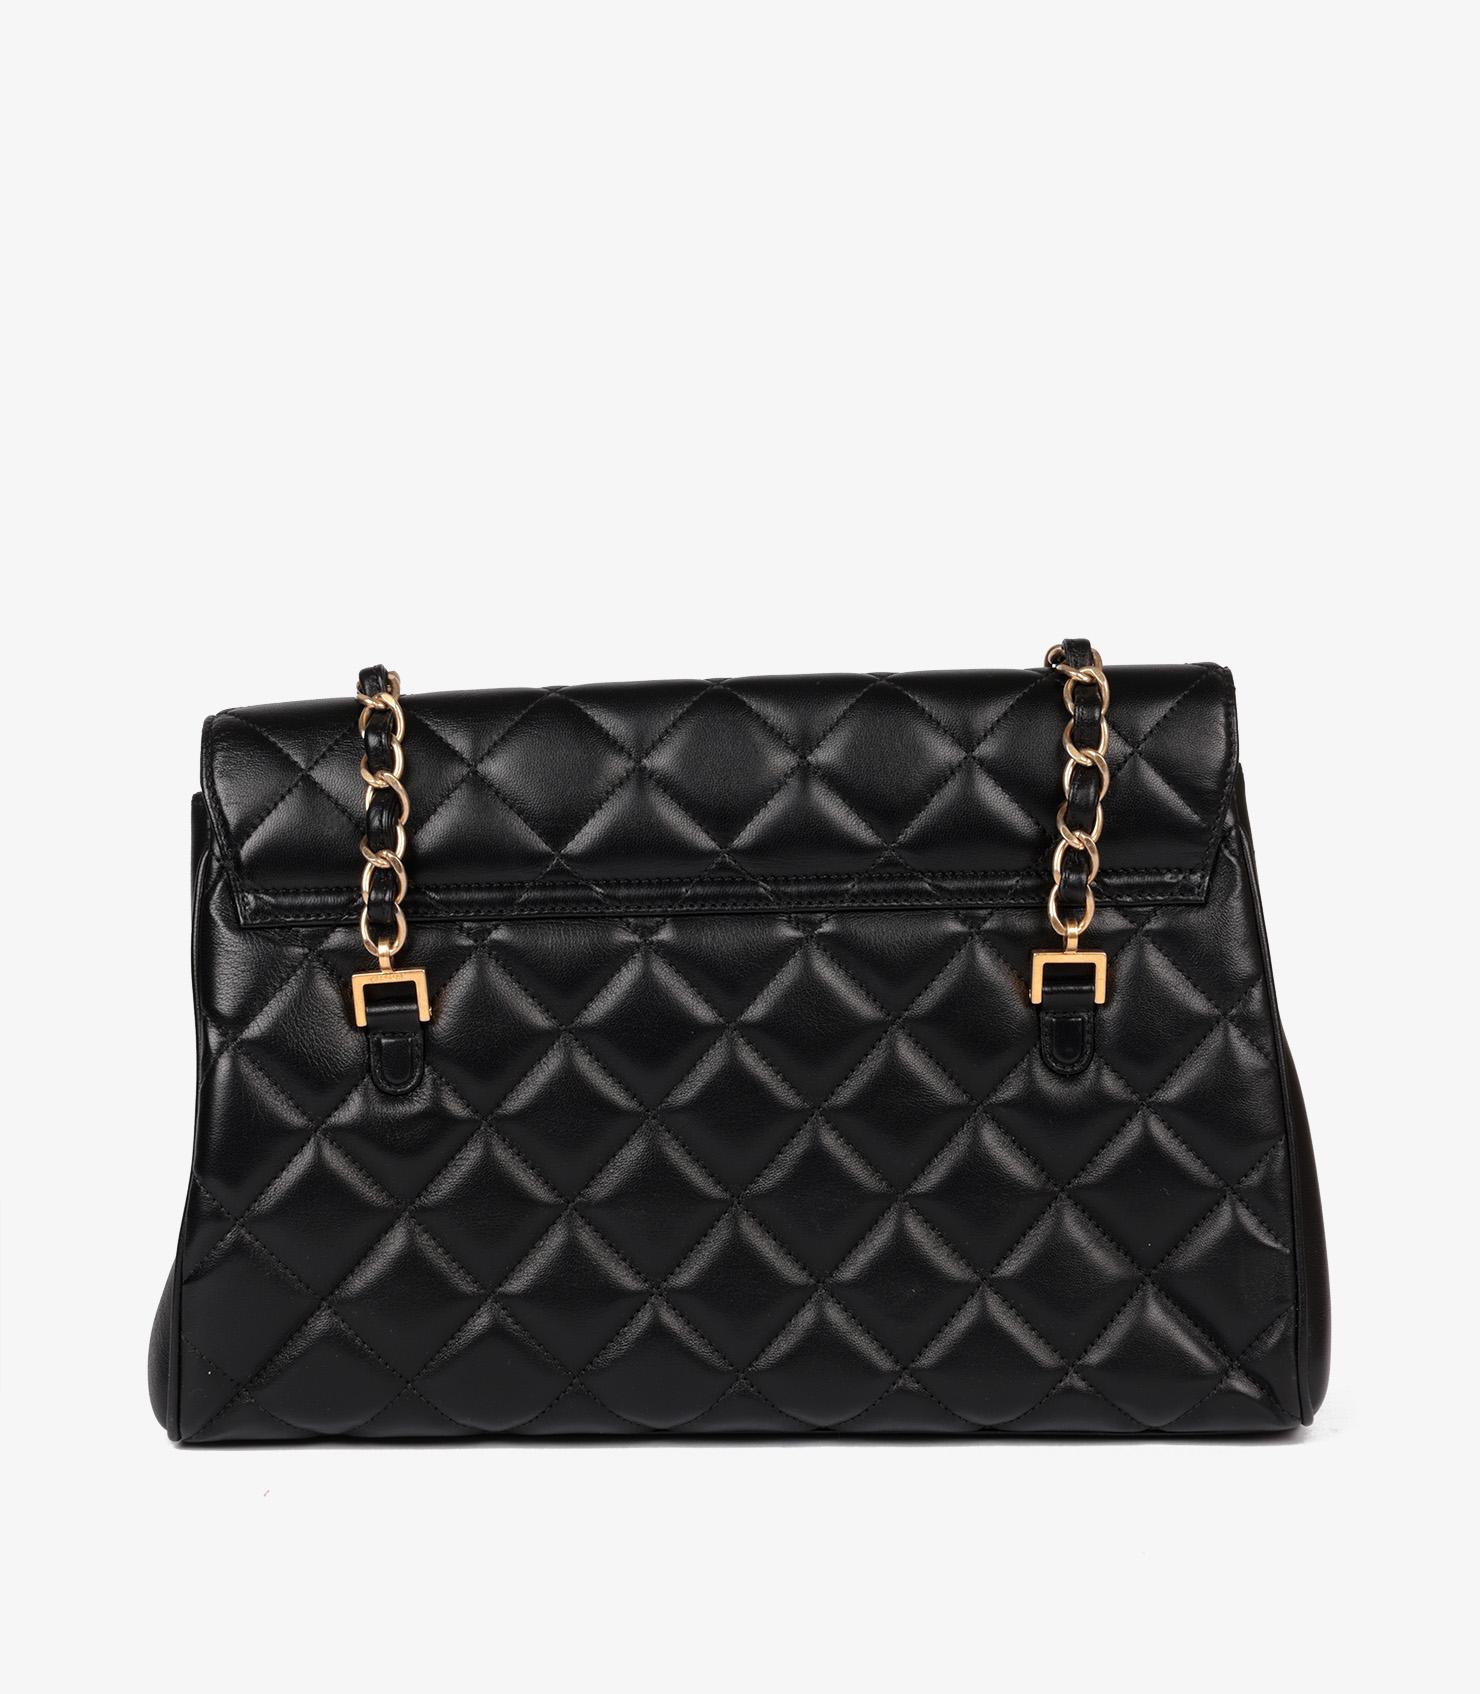 Chanel Black Quilted Lambskin Misia Camera Case Flap Bag 2